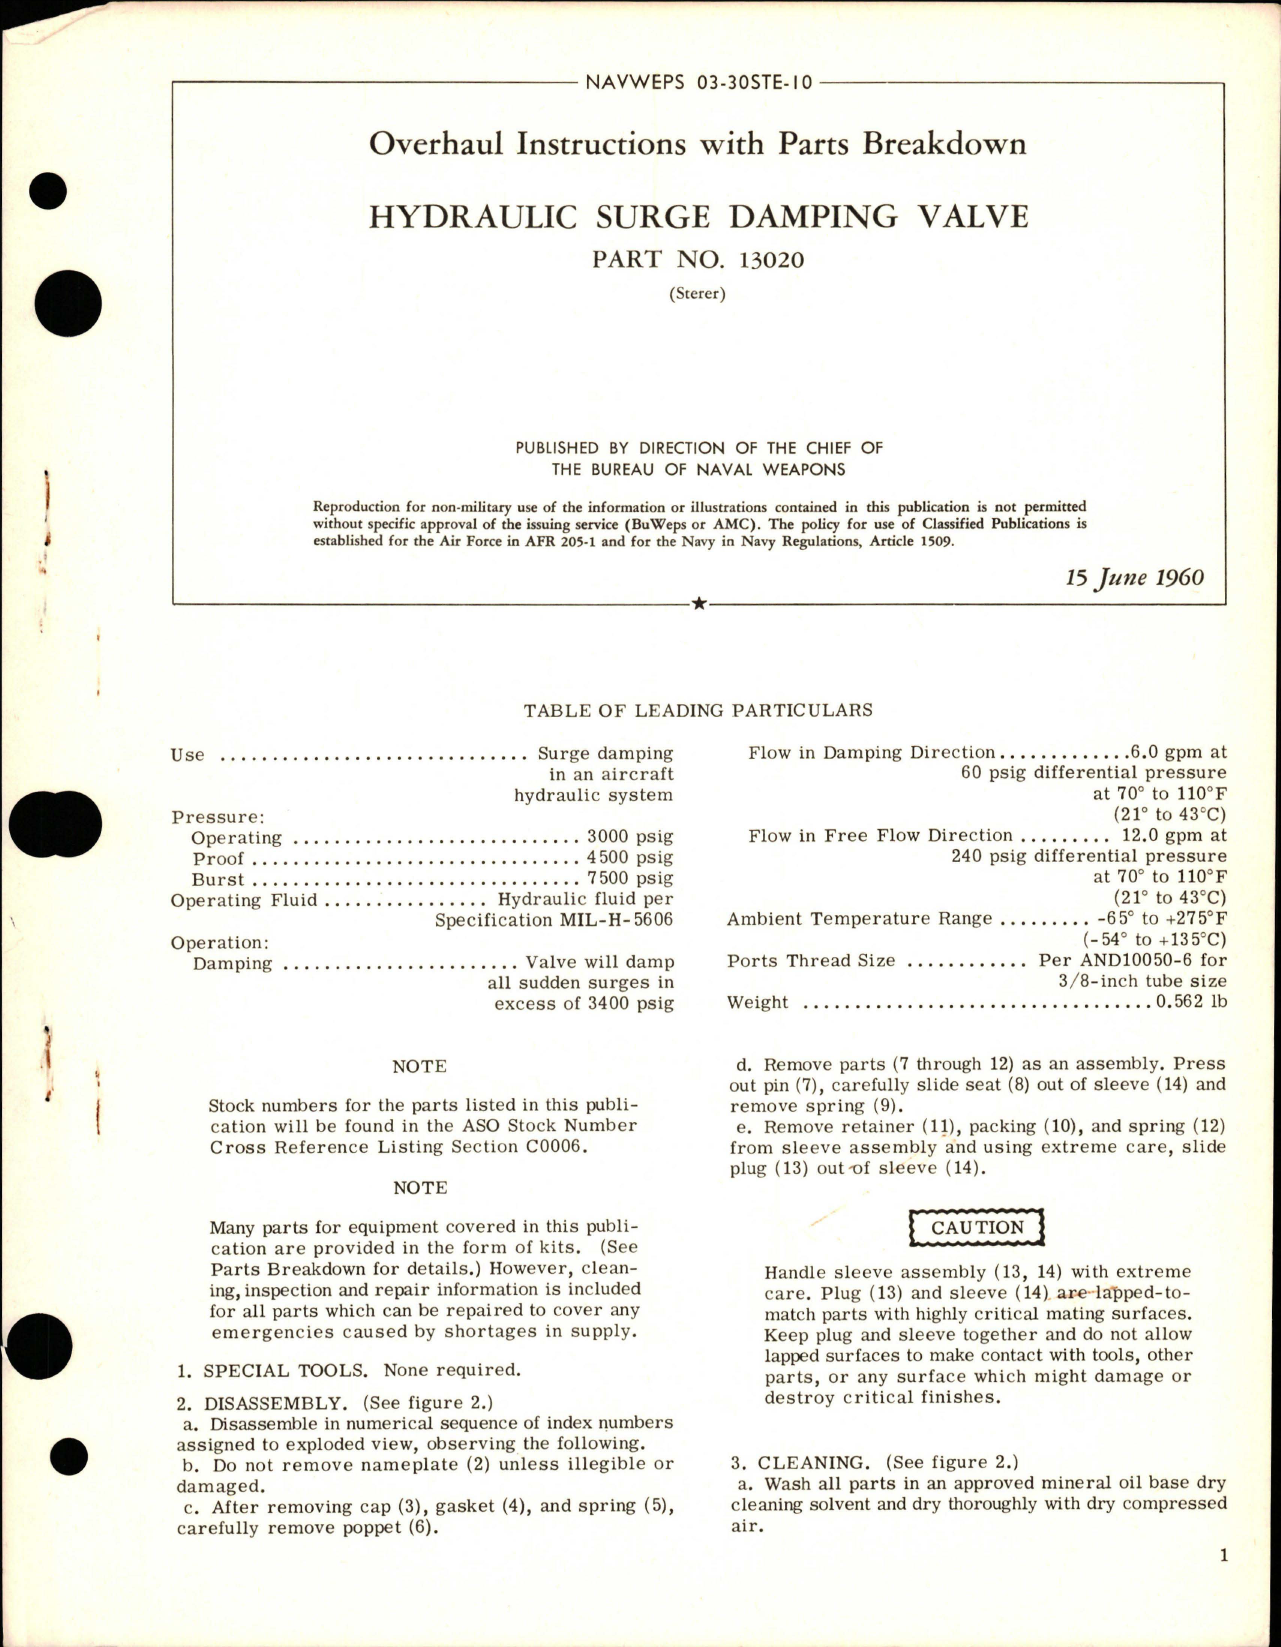 Sample page 1 from AirCorps Library document: Overhaul Instructions with Parts Breakdown for Hydraulic Surge Damping Valve - Part 13020 